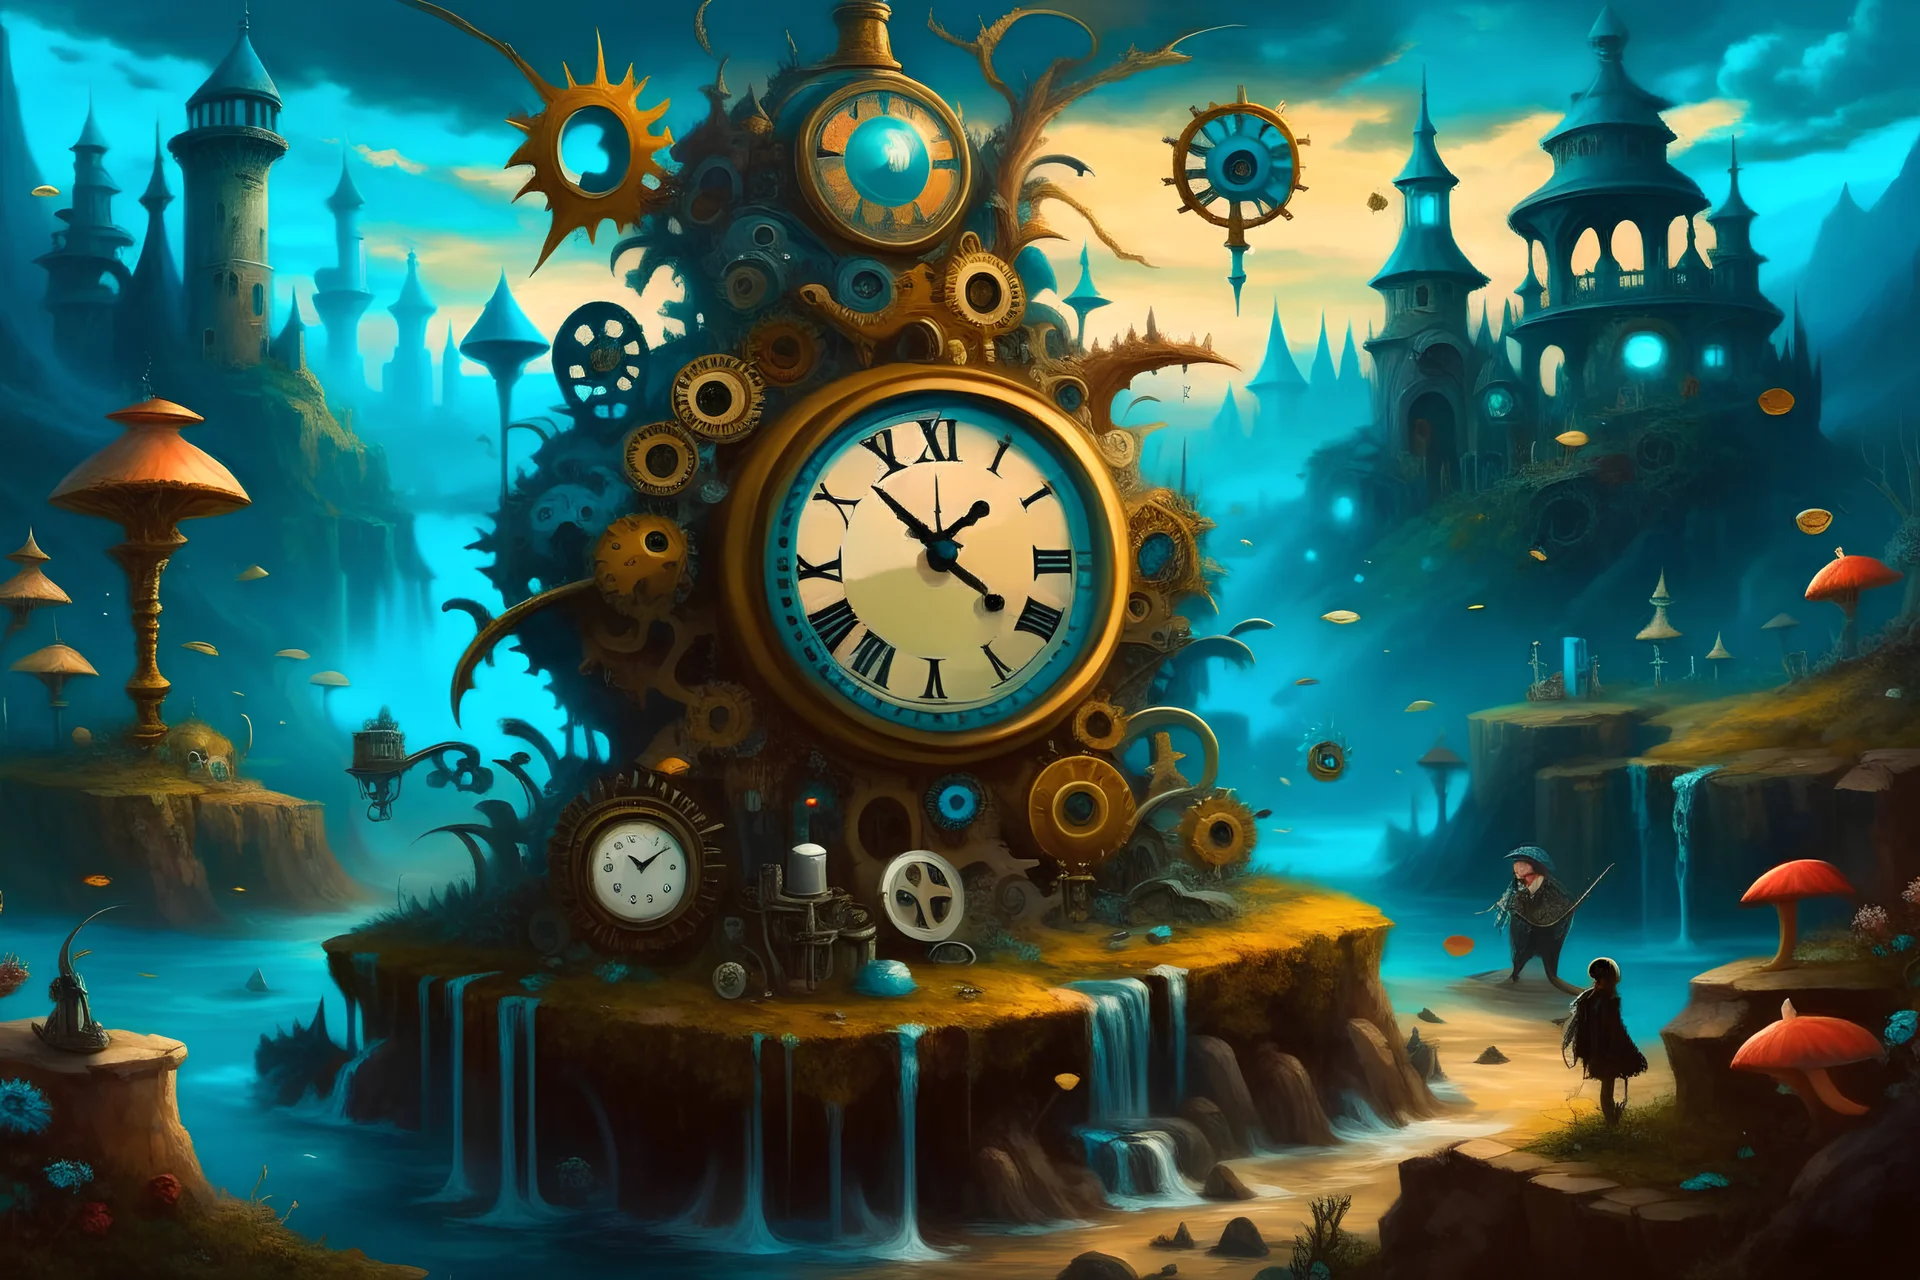 Clockwork Wonderland: Combine elements of Lewis Carroll's Wonderland with intricate clockwork mechanisms and surreal landscapes, exploring the concept of time. Brushstroke driven style of Impressionism with realistic subject matter